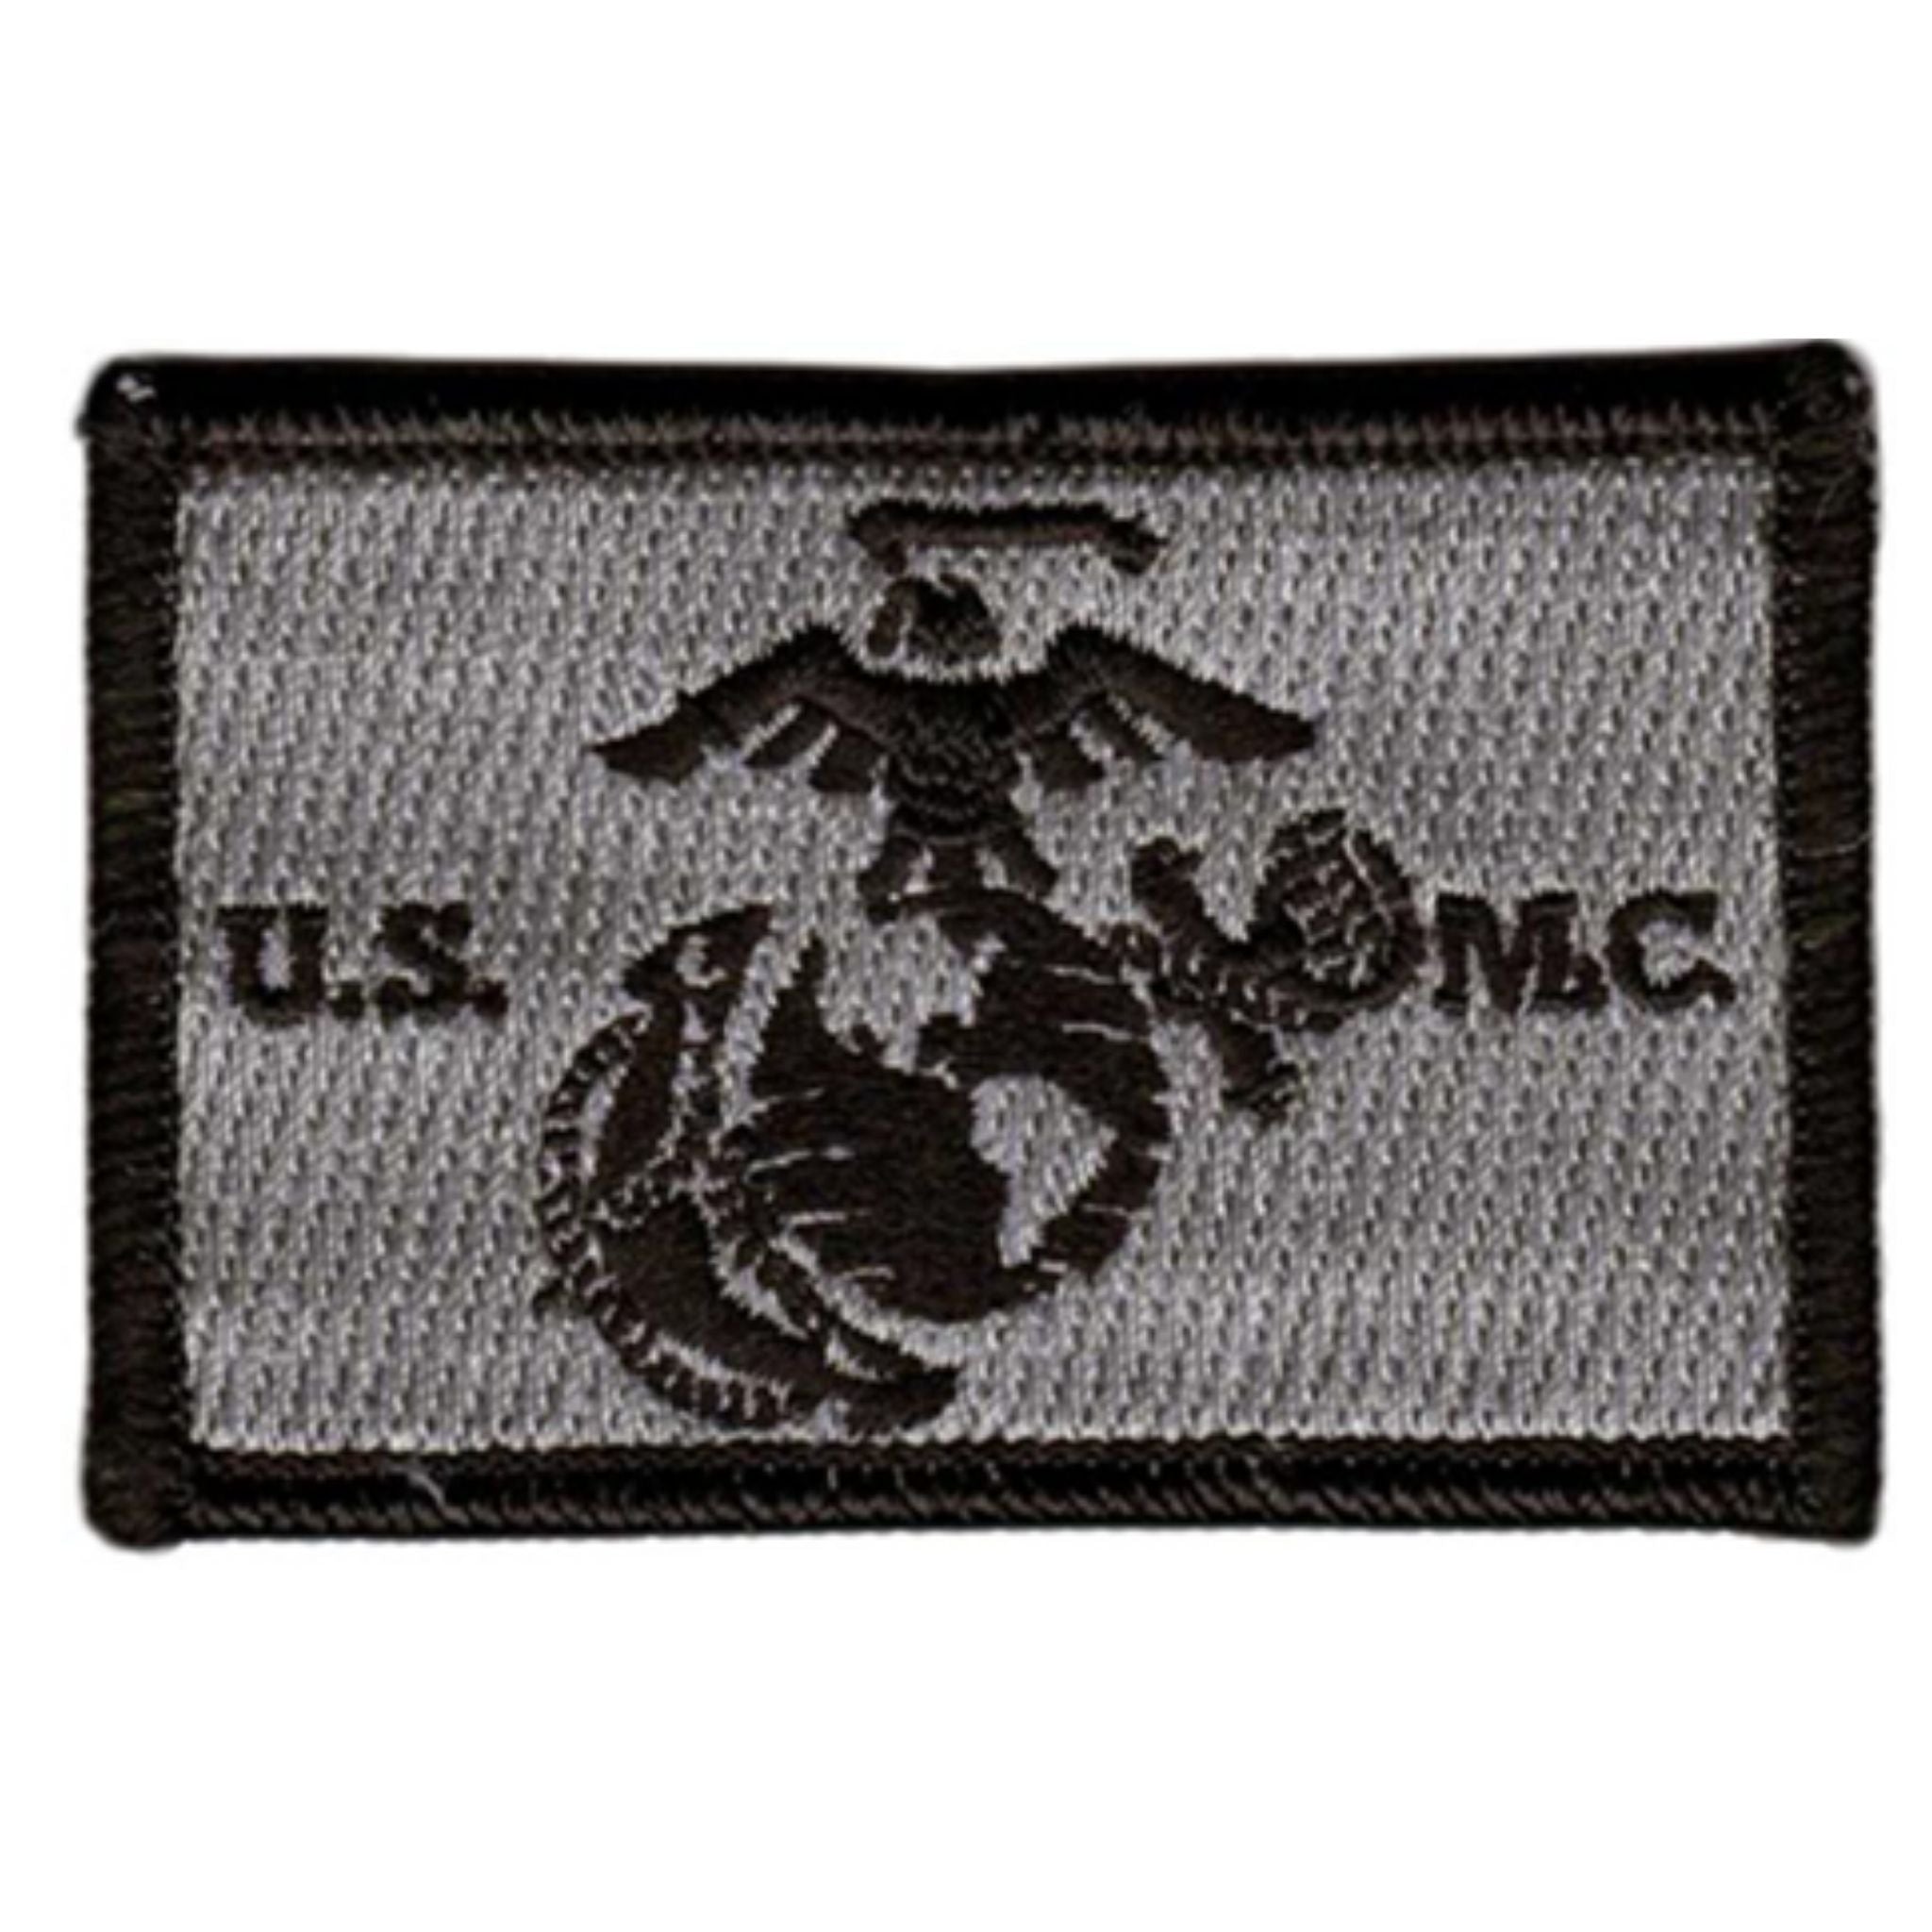 US Marine Corps Patch - Silver-Black